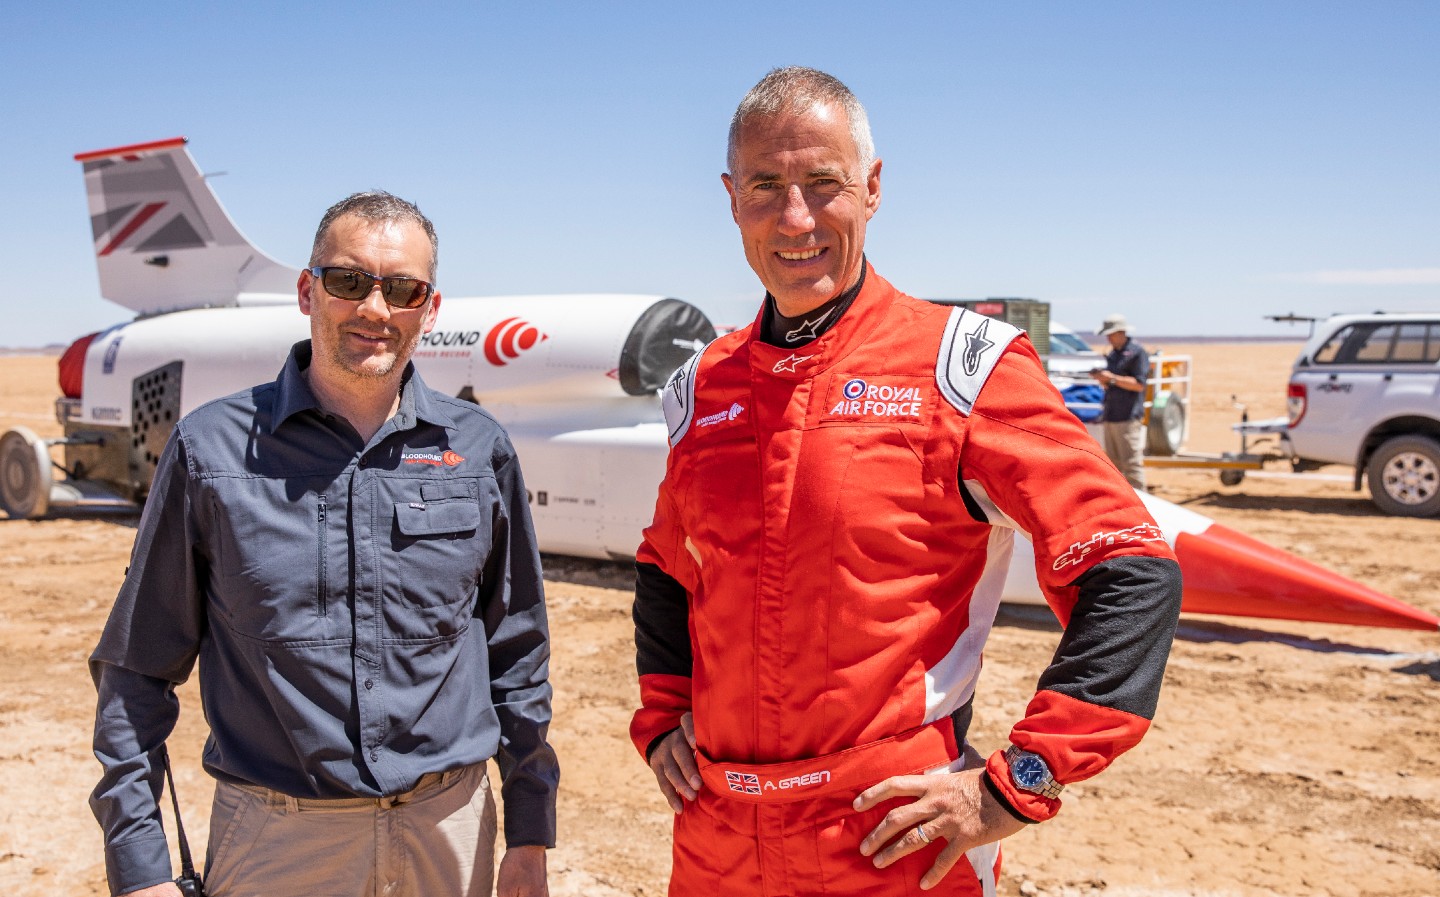 Ian Warhurst and Andy Green at Hakseen Pan, South Africa, during high speed testing of Bloodhound LSR.